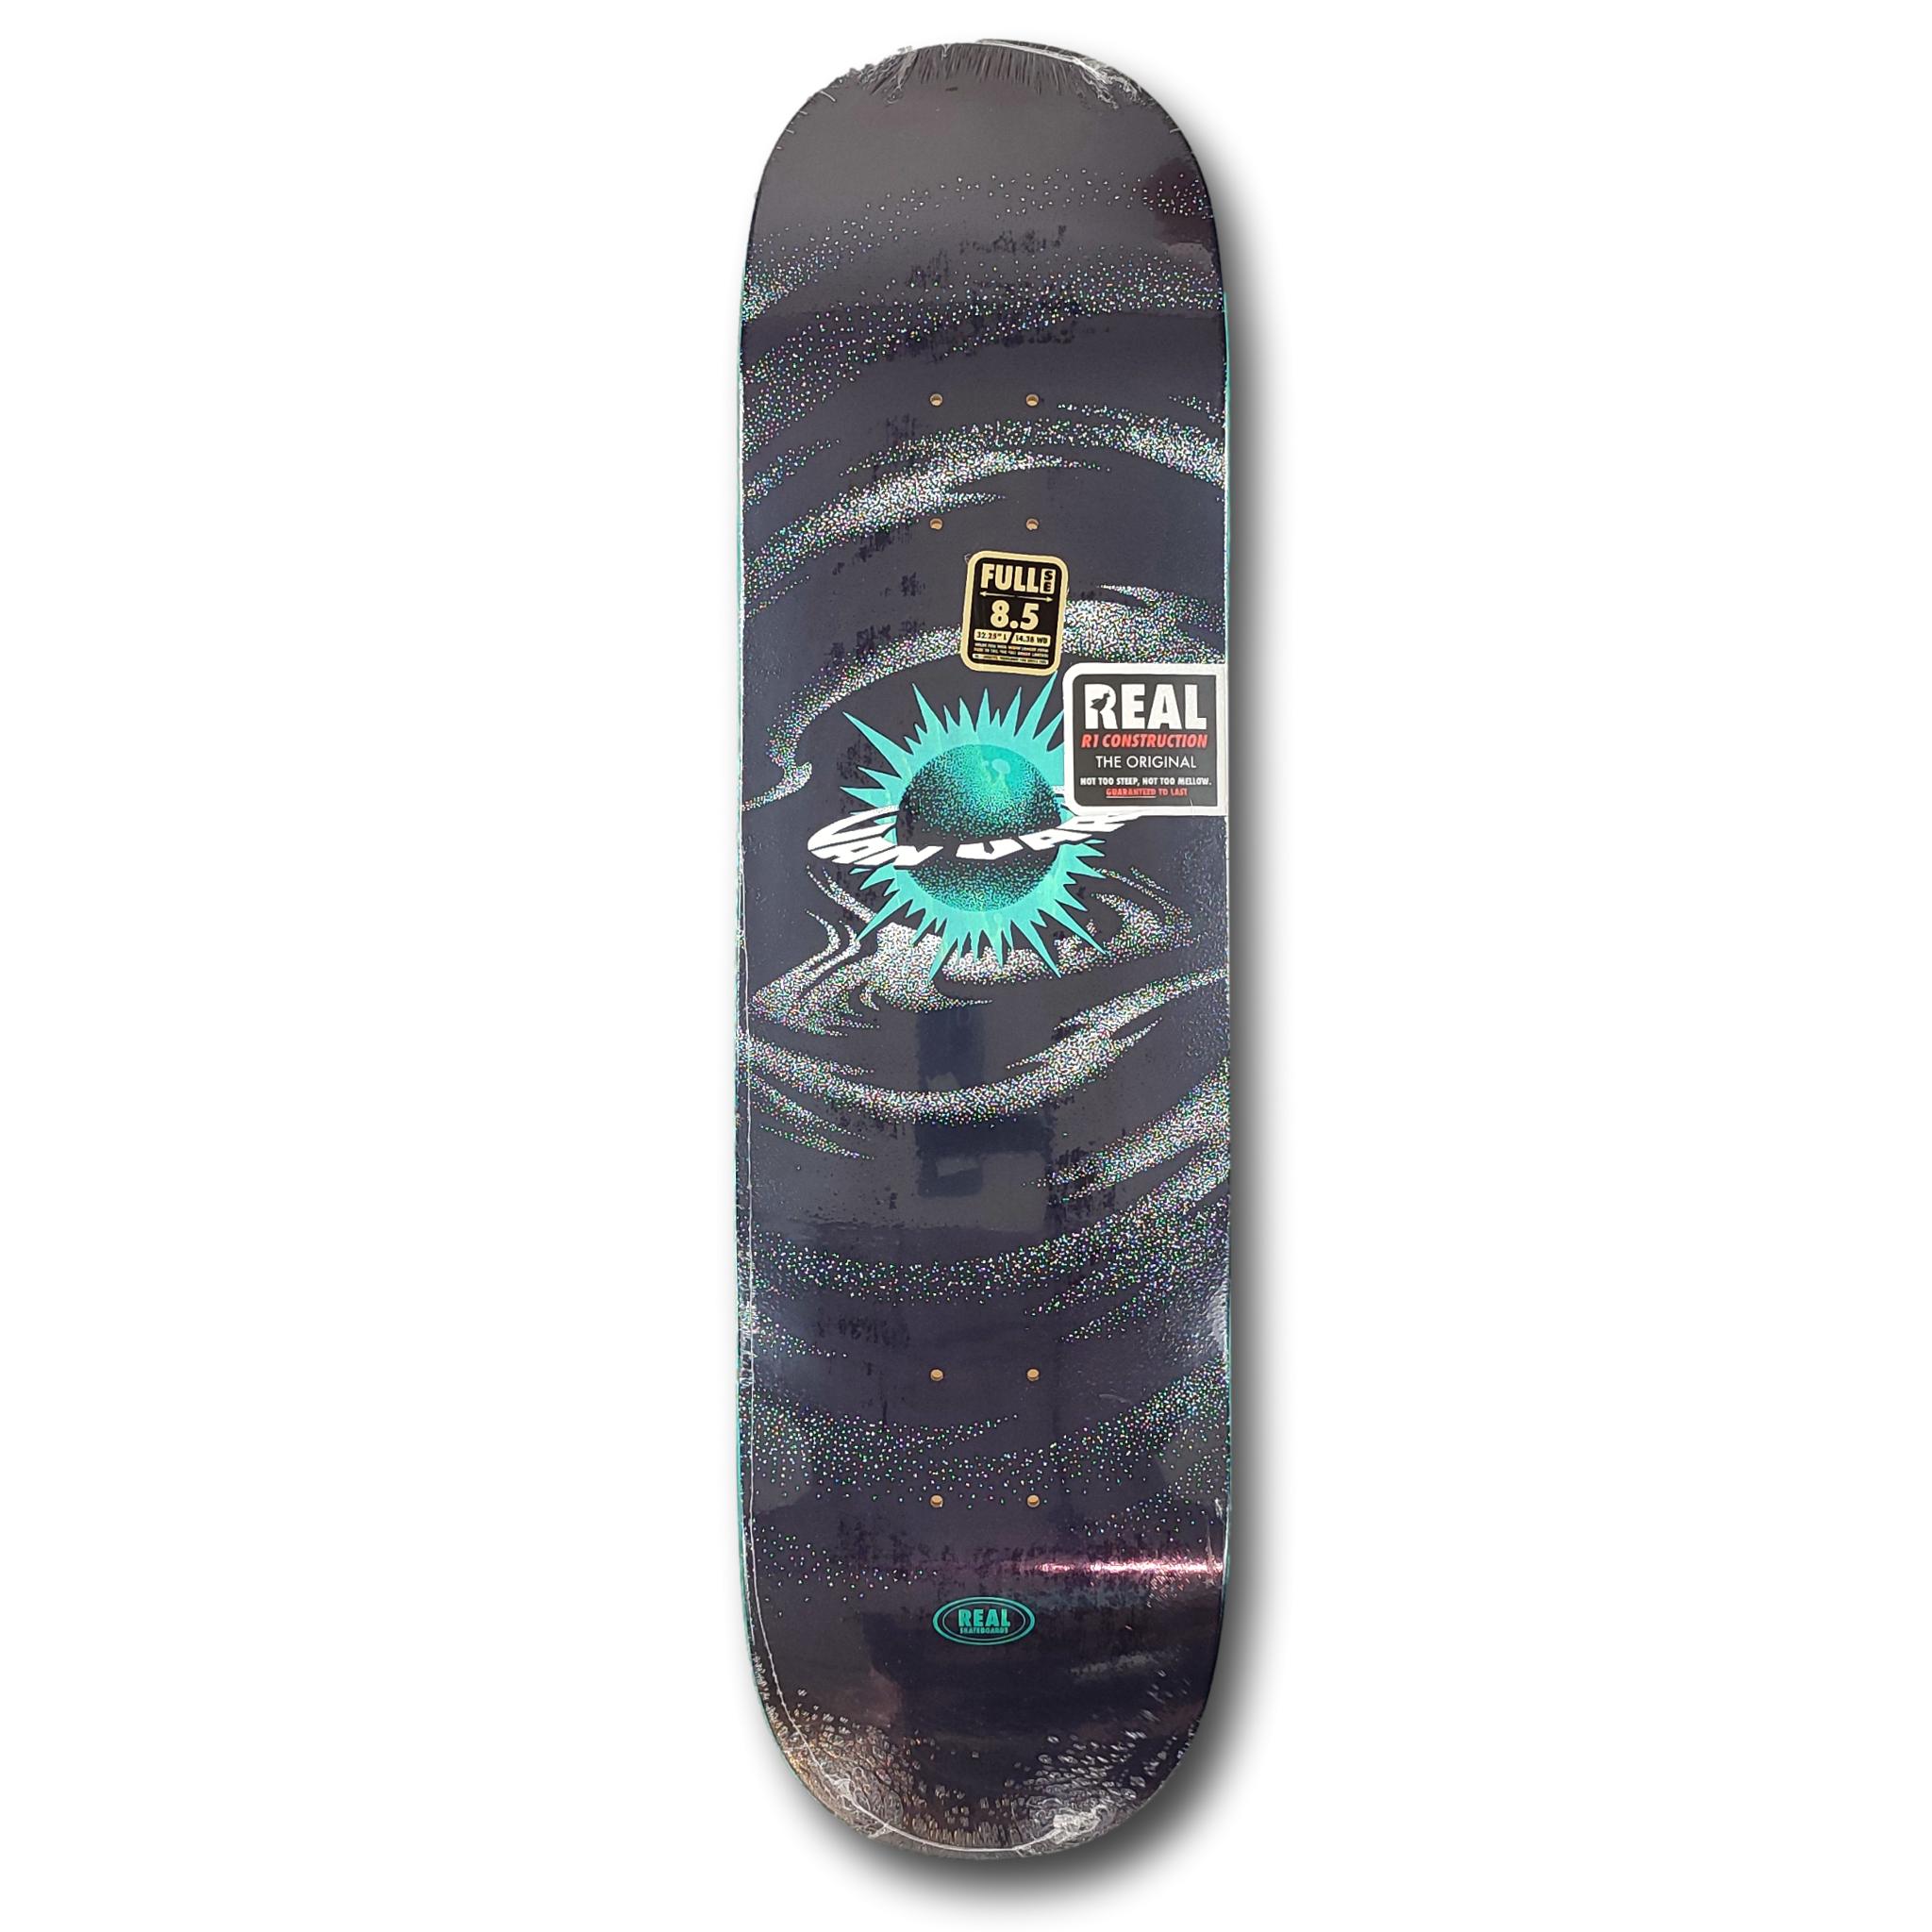 REAL SKATEBOARDS TANNER SPACED OUT DECK 8.5